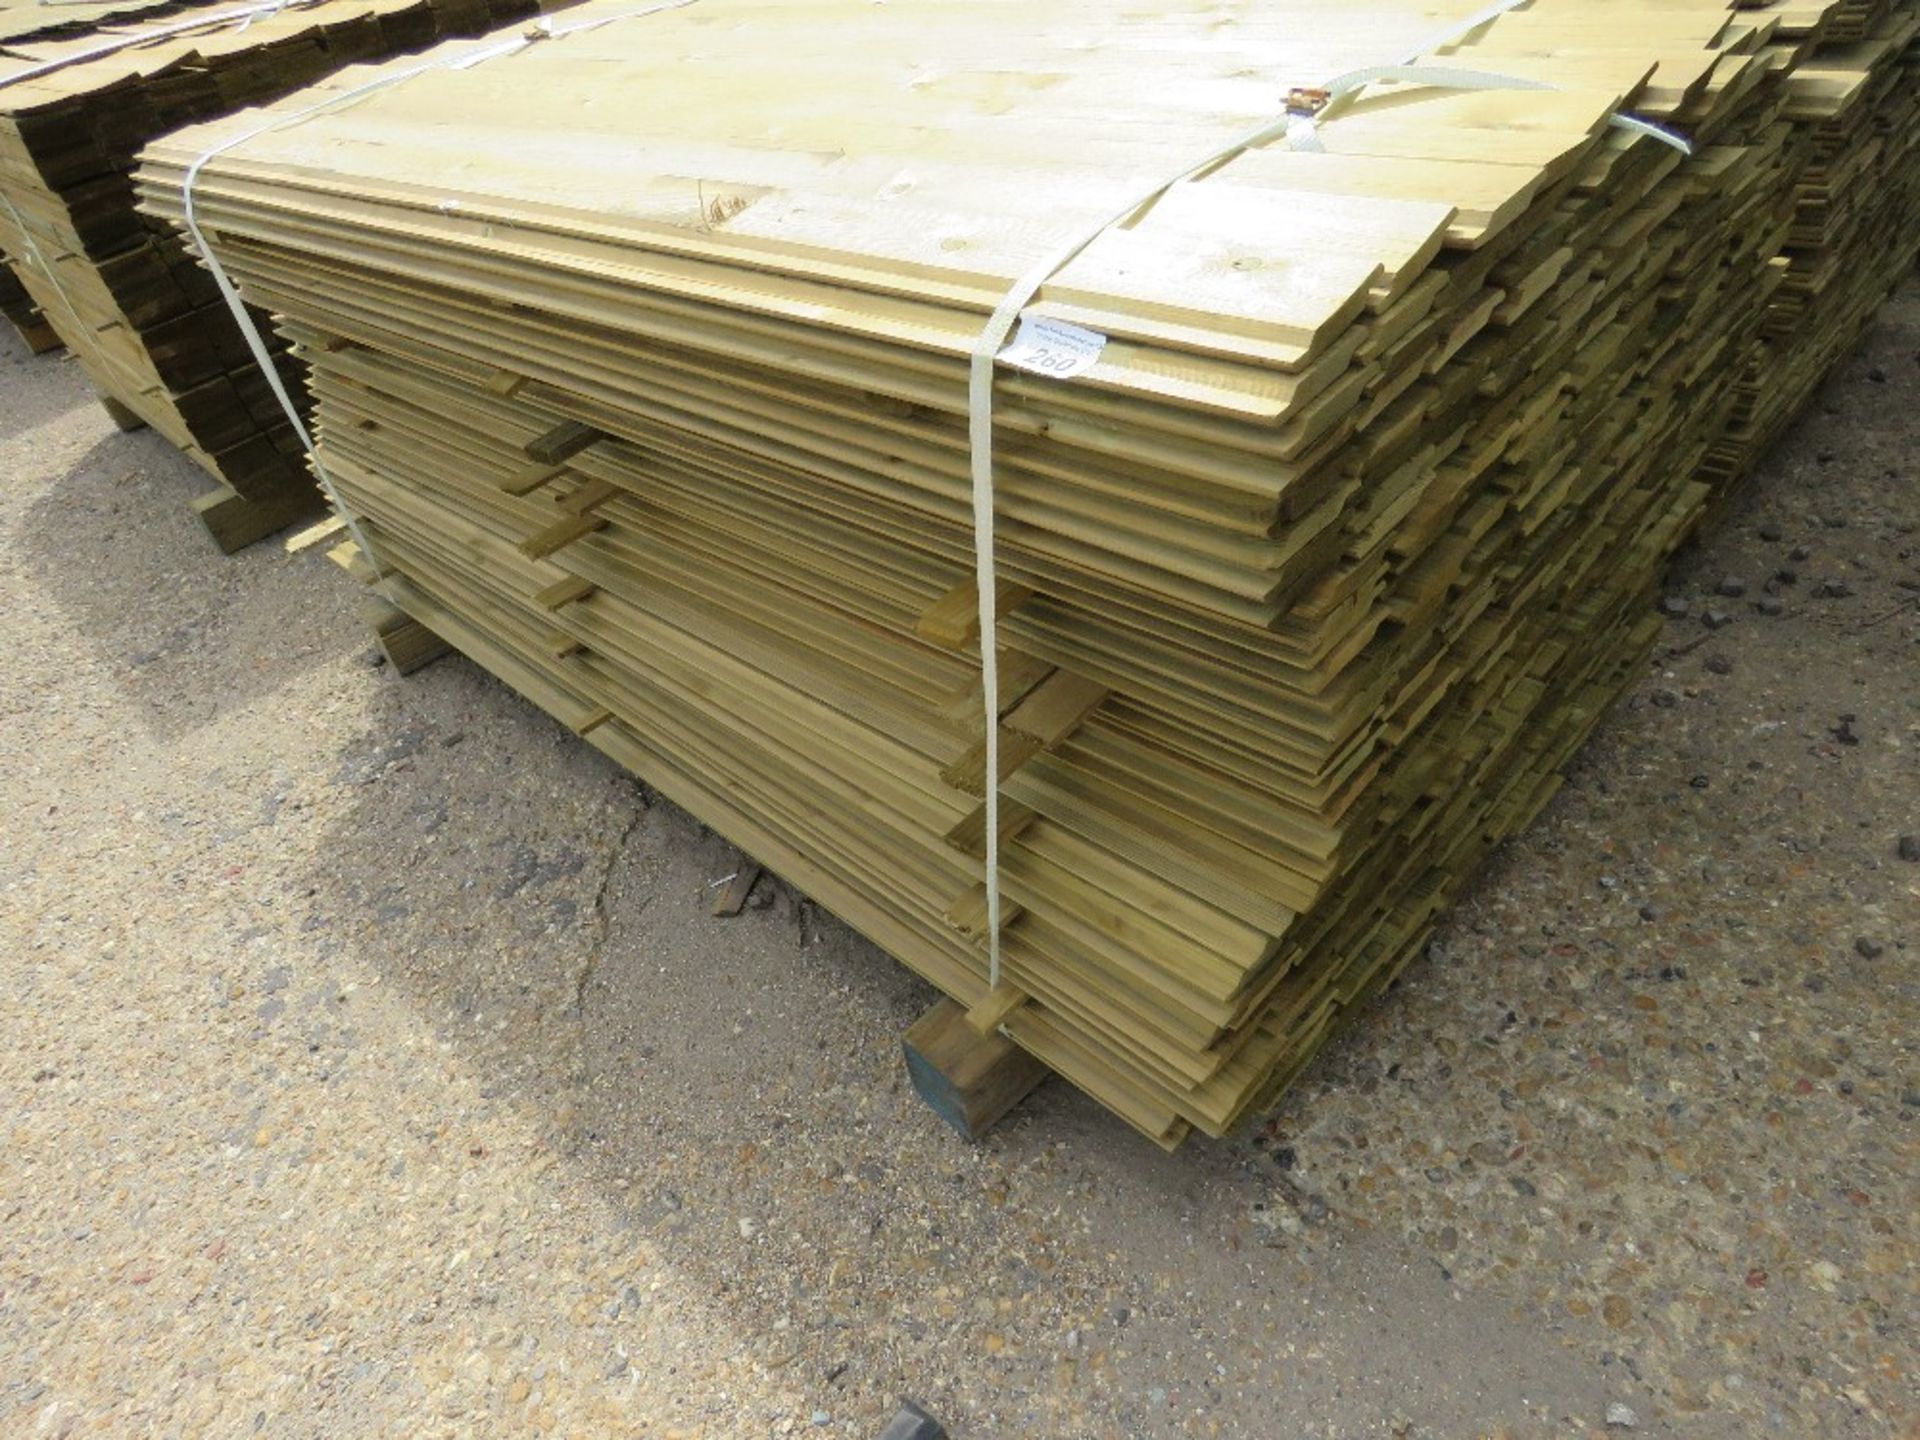 LARGE PACK OF SHIPLAP FENCE CLADDING TIMBER BOARDS, 1.72M LENGTH X 9.5CM WIDTH APPROX.